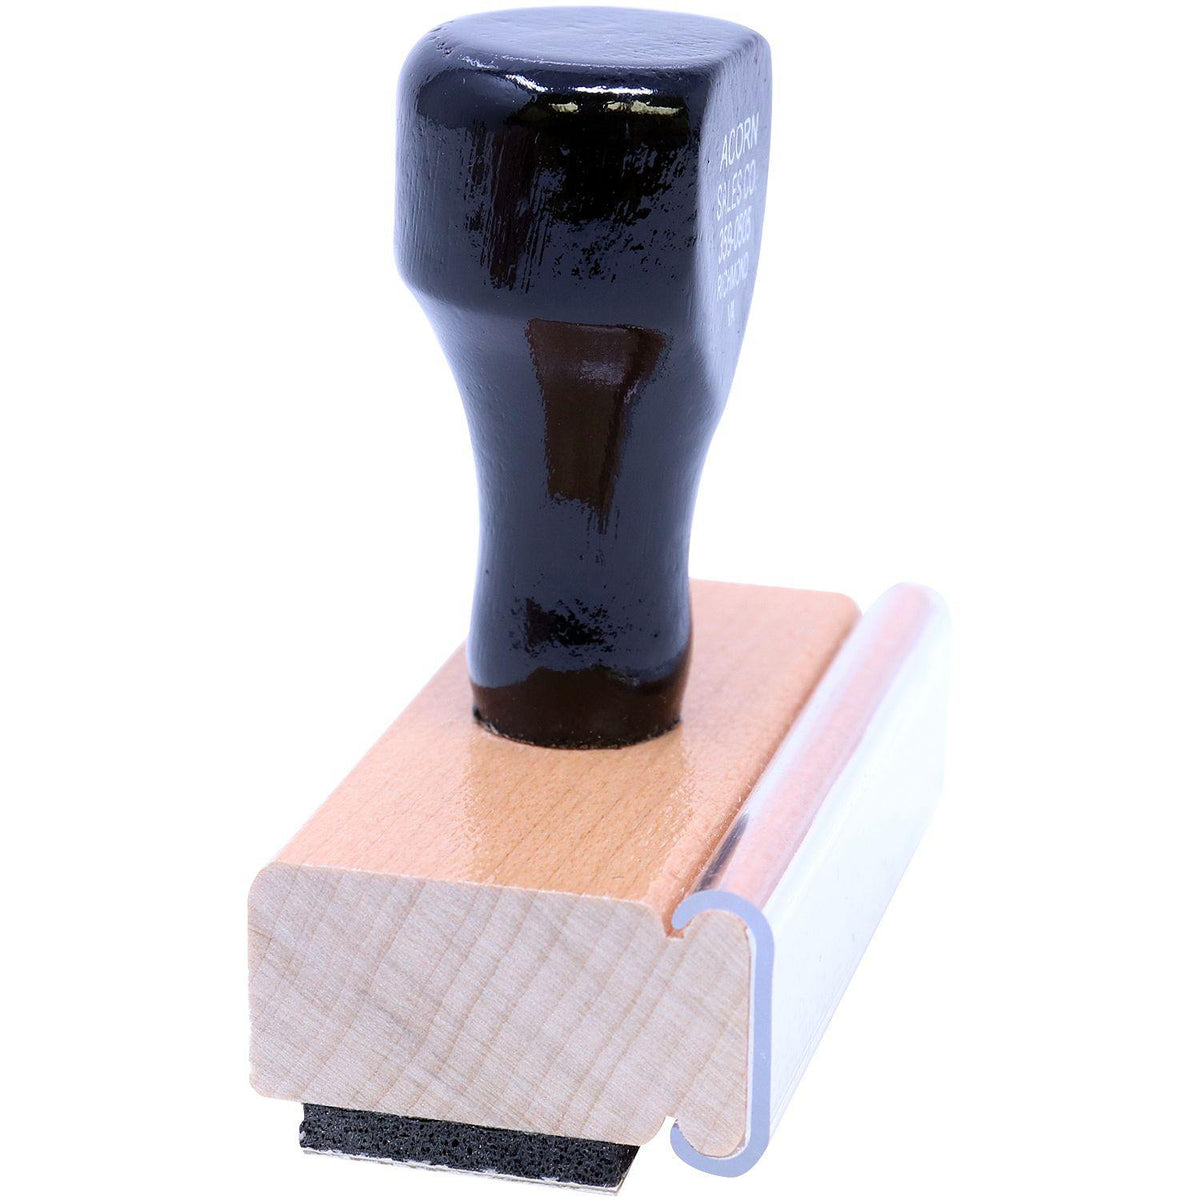 Large Too Social During Class Today Rubber Stamp - Engineer Seal Stamps - Brand_Acorn, Impression Size_Large, Stamp Type_Regular Stamp, Type of Use_Teacher